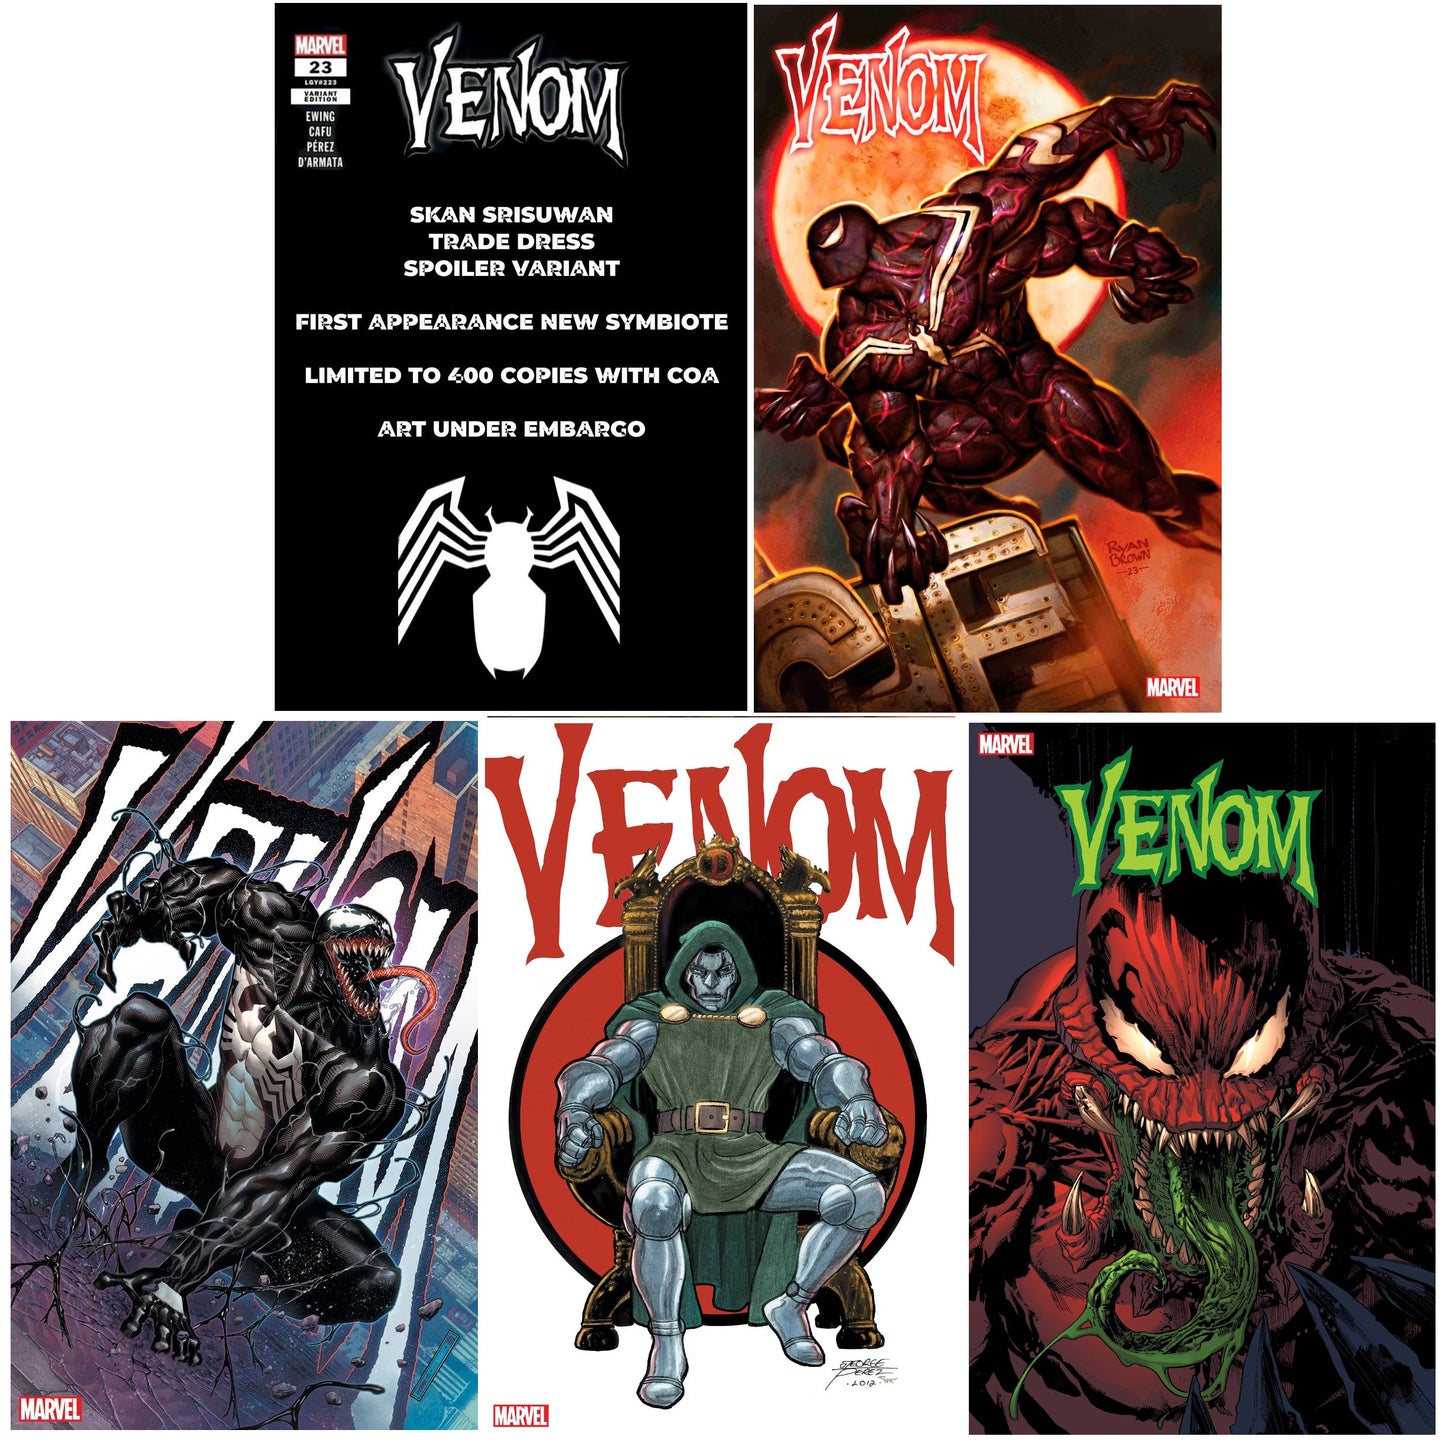 VENOM #23 SKAN SRISUWAN SPOILER VARIANT LIMITED TO 400 COPIES WITH NUMBRED COA + 1:25, 1:50, 1:100 & 1:200 VARIANT